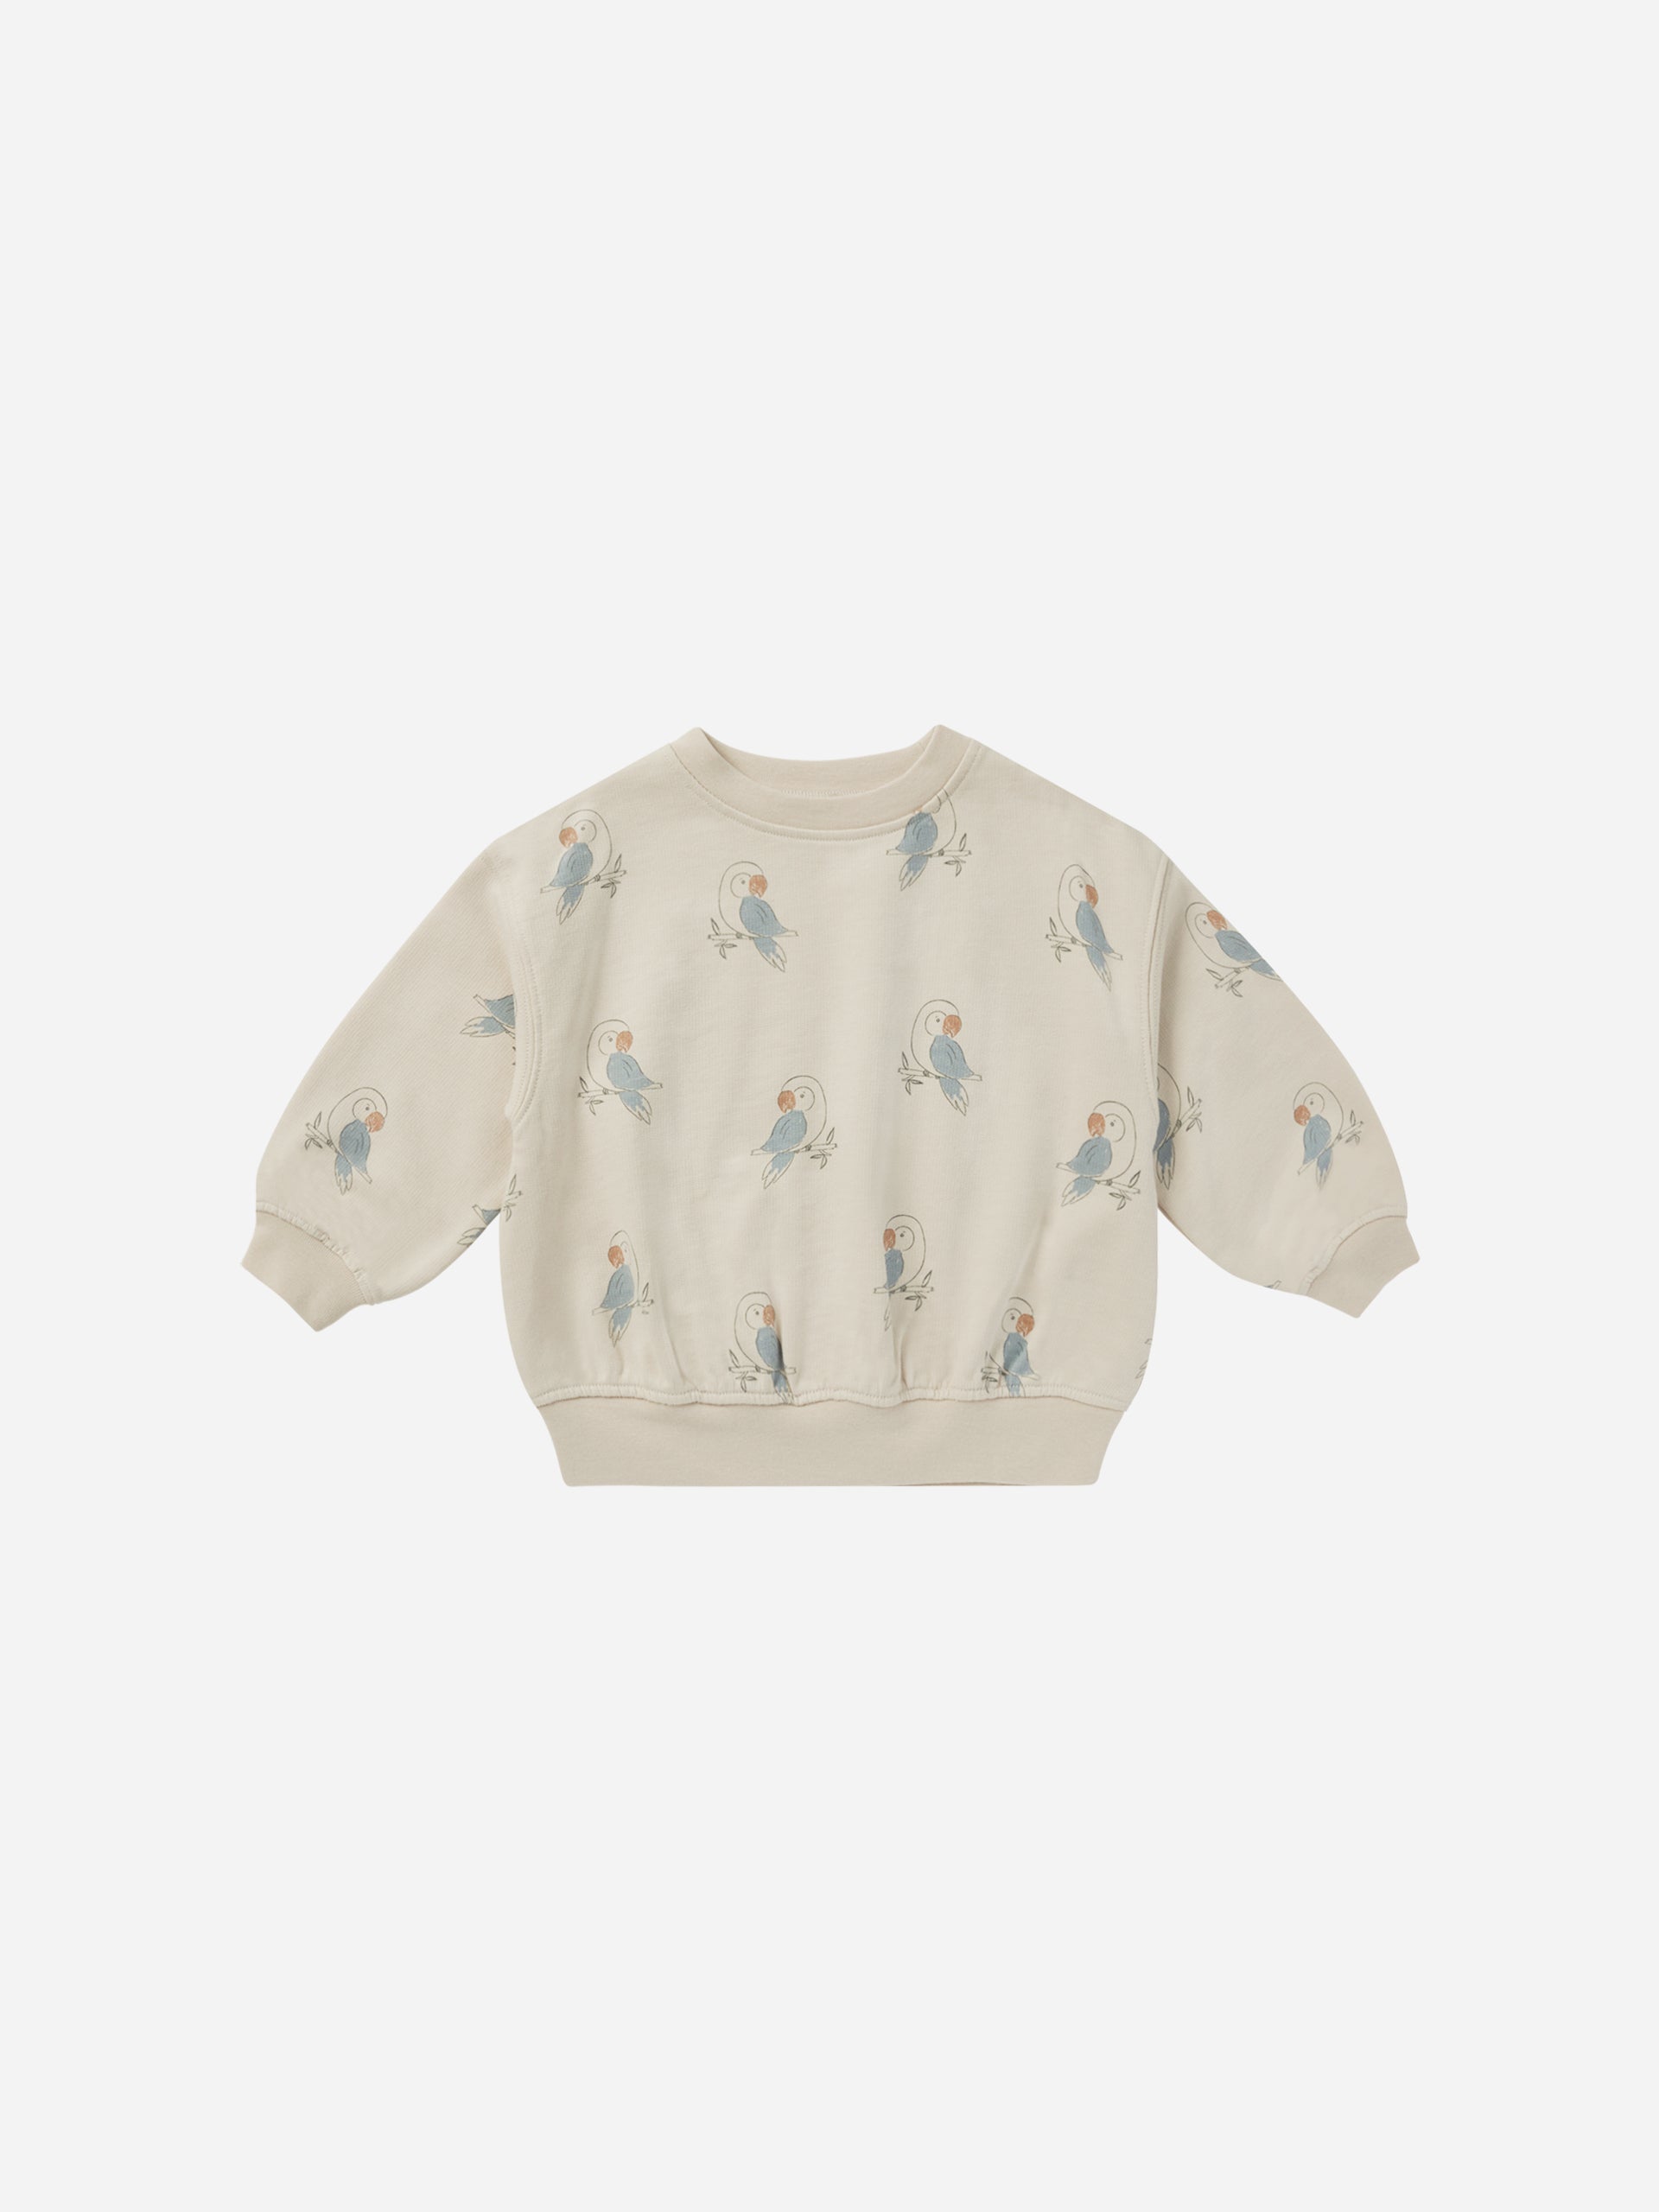 Sweatshirt || Parrots - Rylee + Cru | Kids Clothes | Trendy Baby Clothes | Modern Infant Outfits |